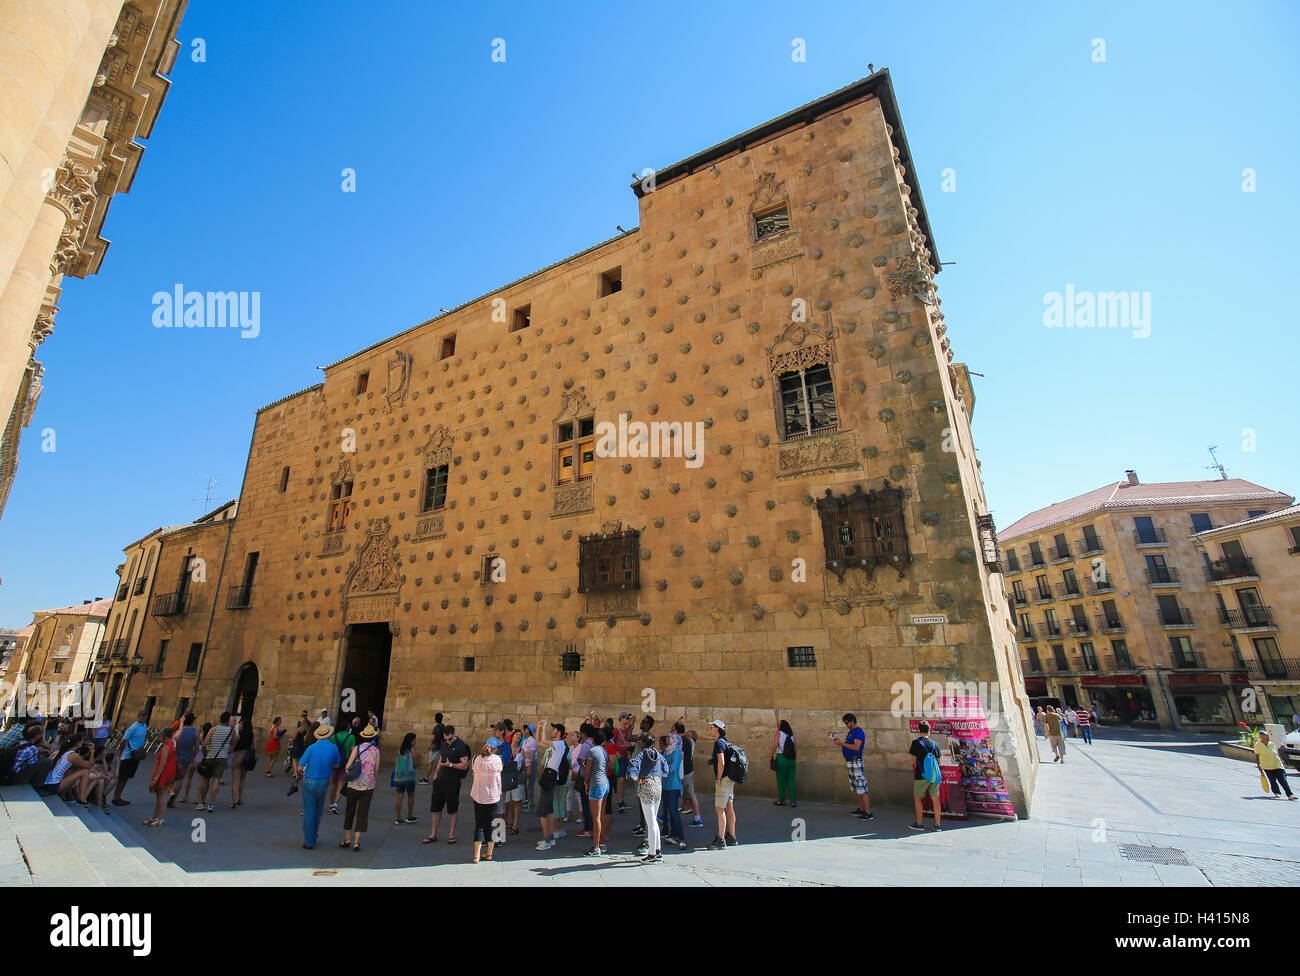 Tourists in front of the Casa de las Conchas, a historical building in Salamanca, central Spain Stock Photo